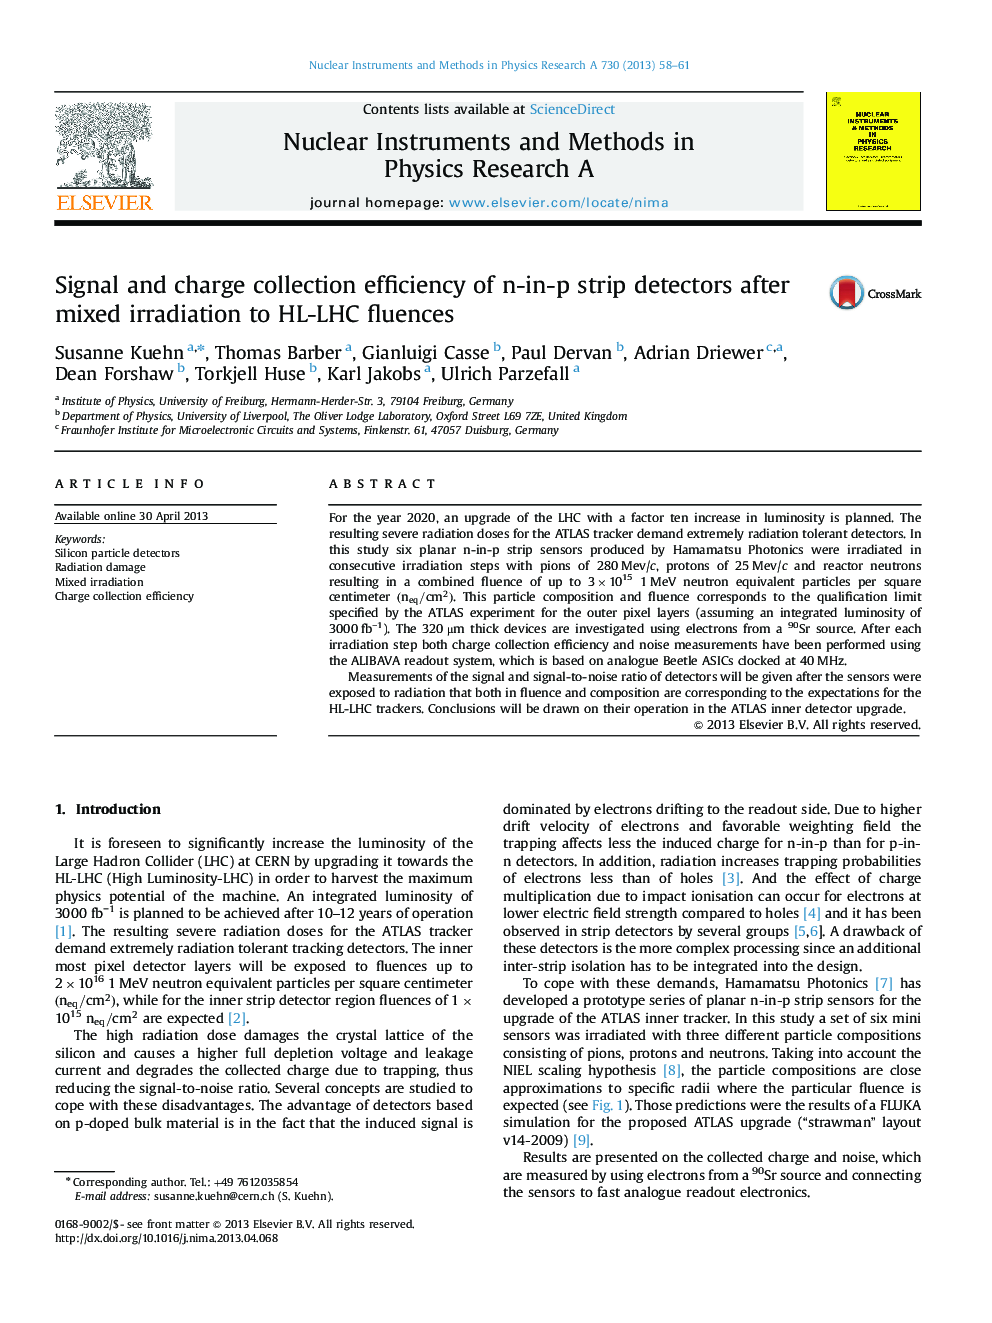 Signal and charge collection efficiency of n-in-p strip detectors after mixed irradiation to HL-LHC fluences